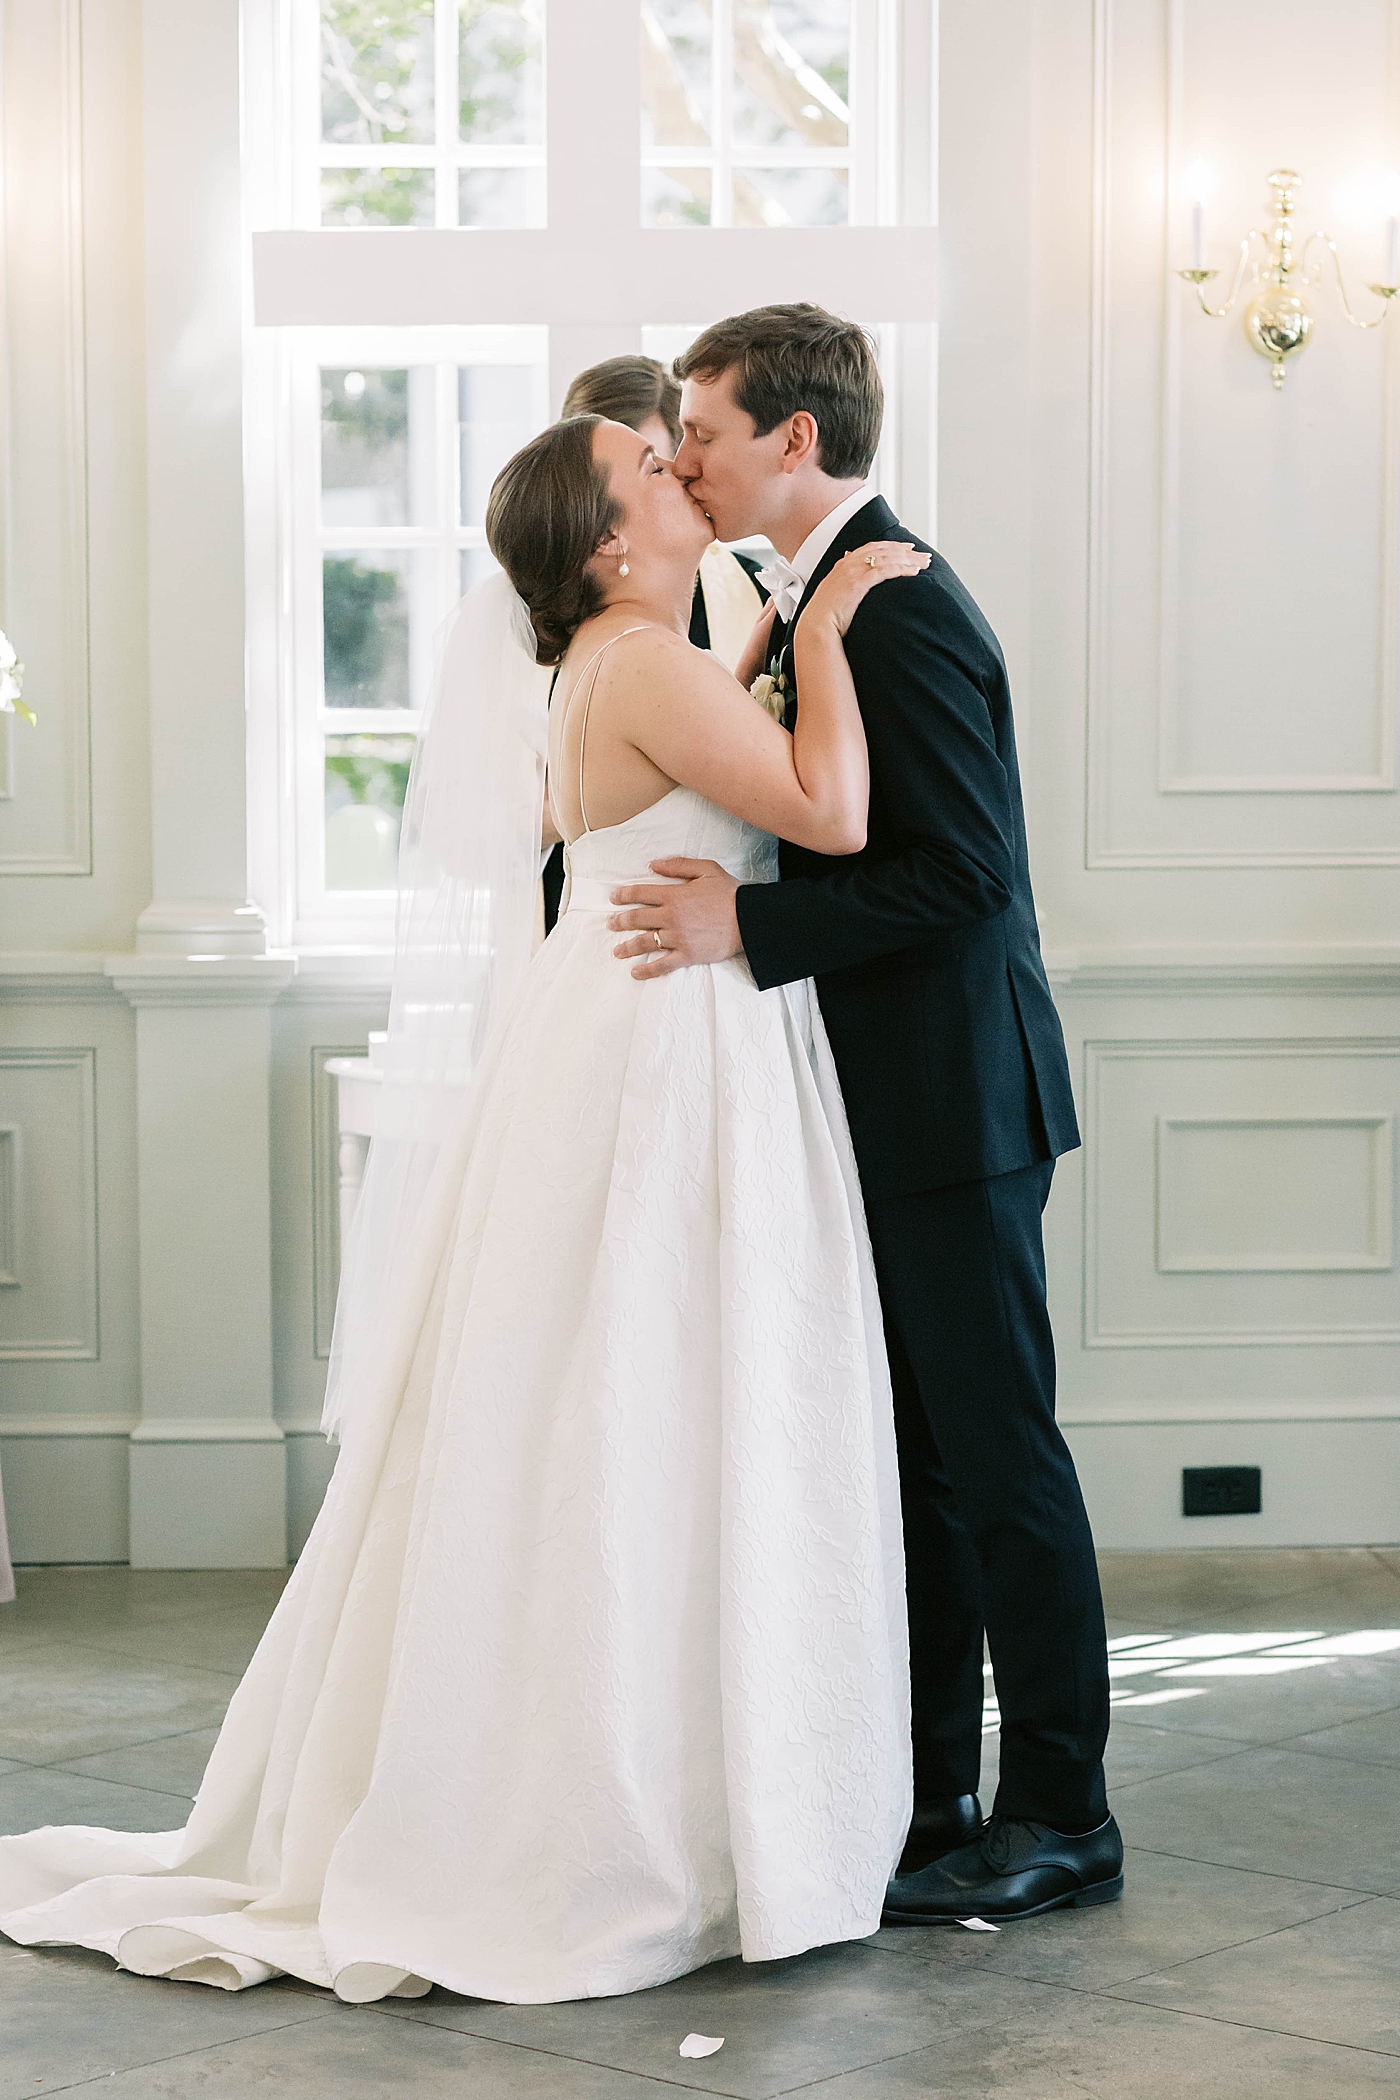 Bride and groom first kiss during their Intimate spring wedding | Carters Event Co